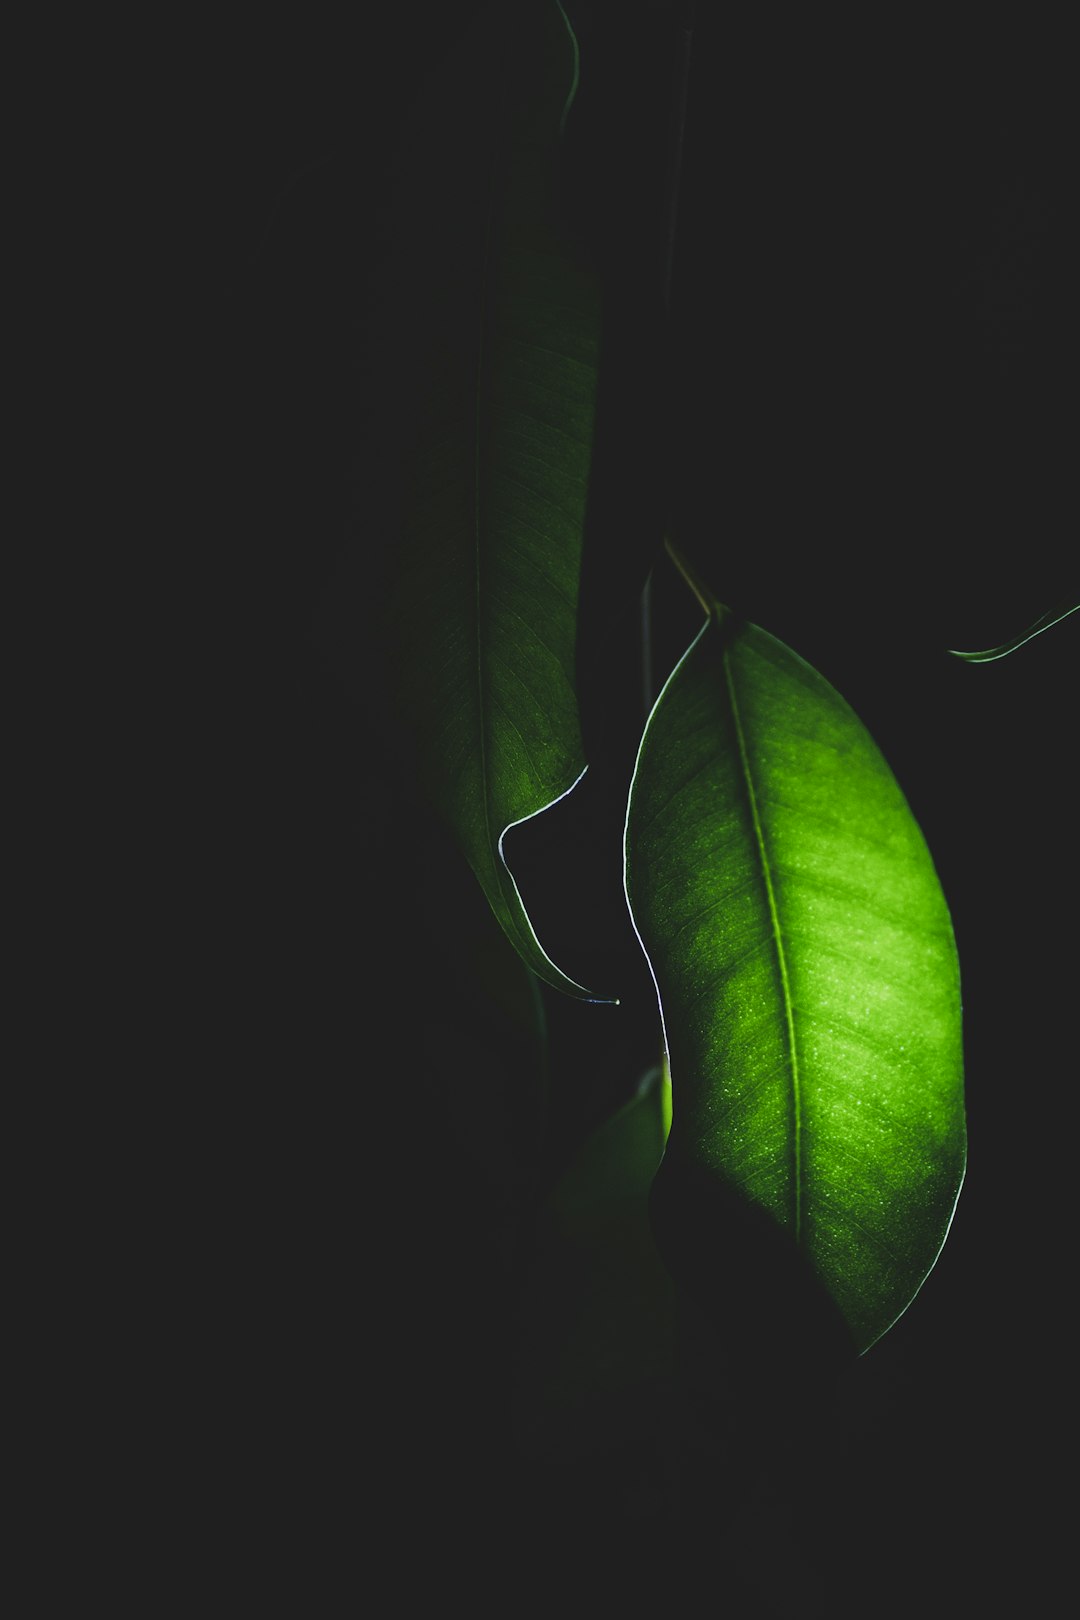 green leaves with black background